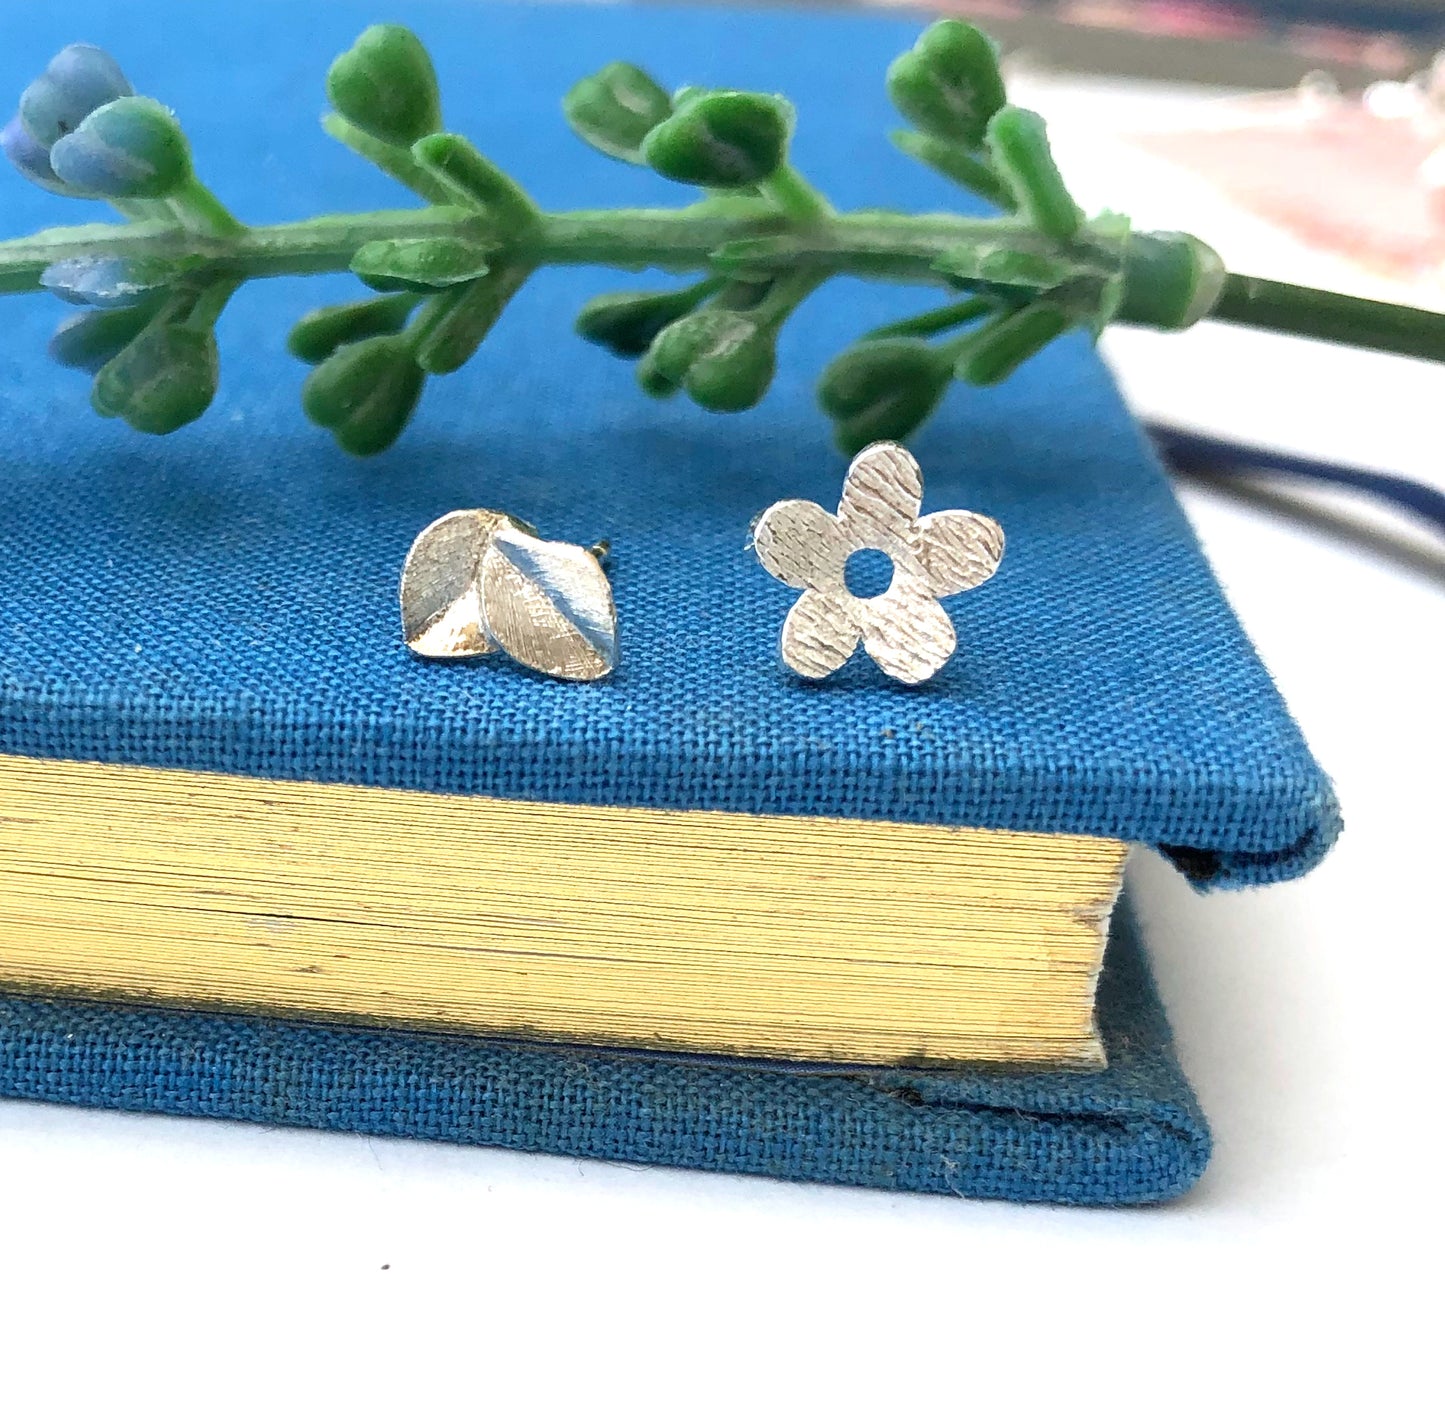 Dainty Flower And Leaf Mismatched Earrings, Sterling Silver Botanical Floral Stud Earrings